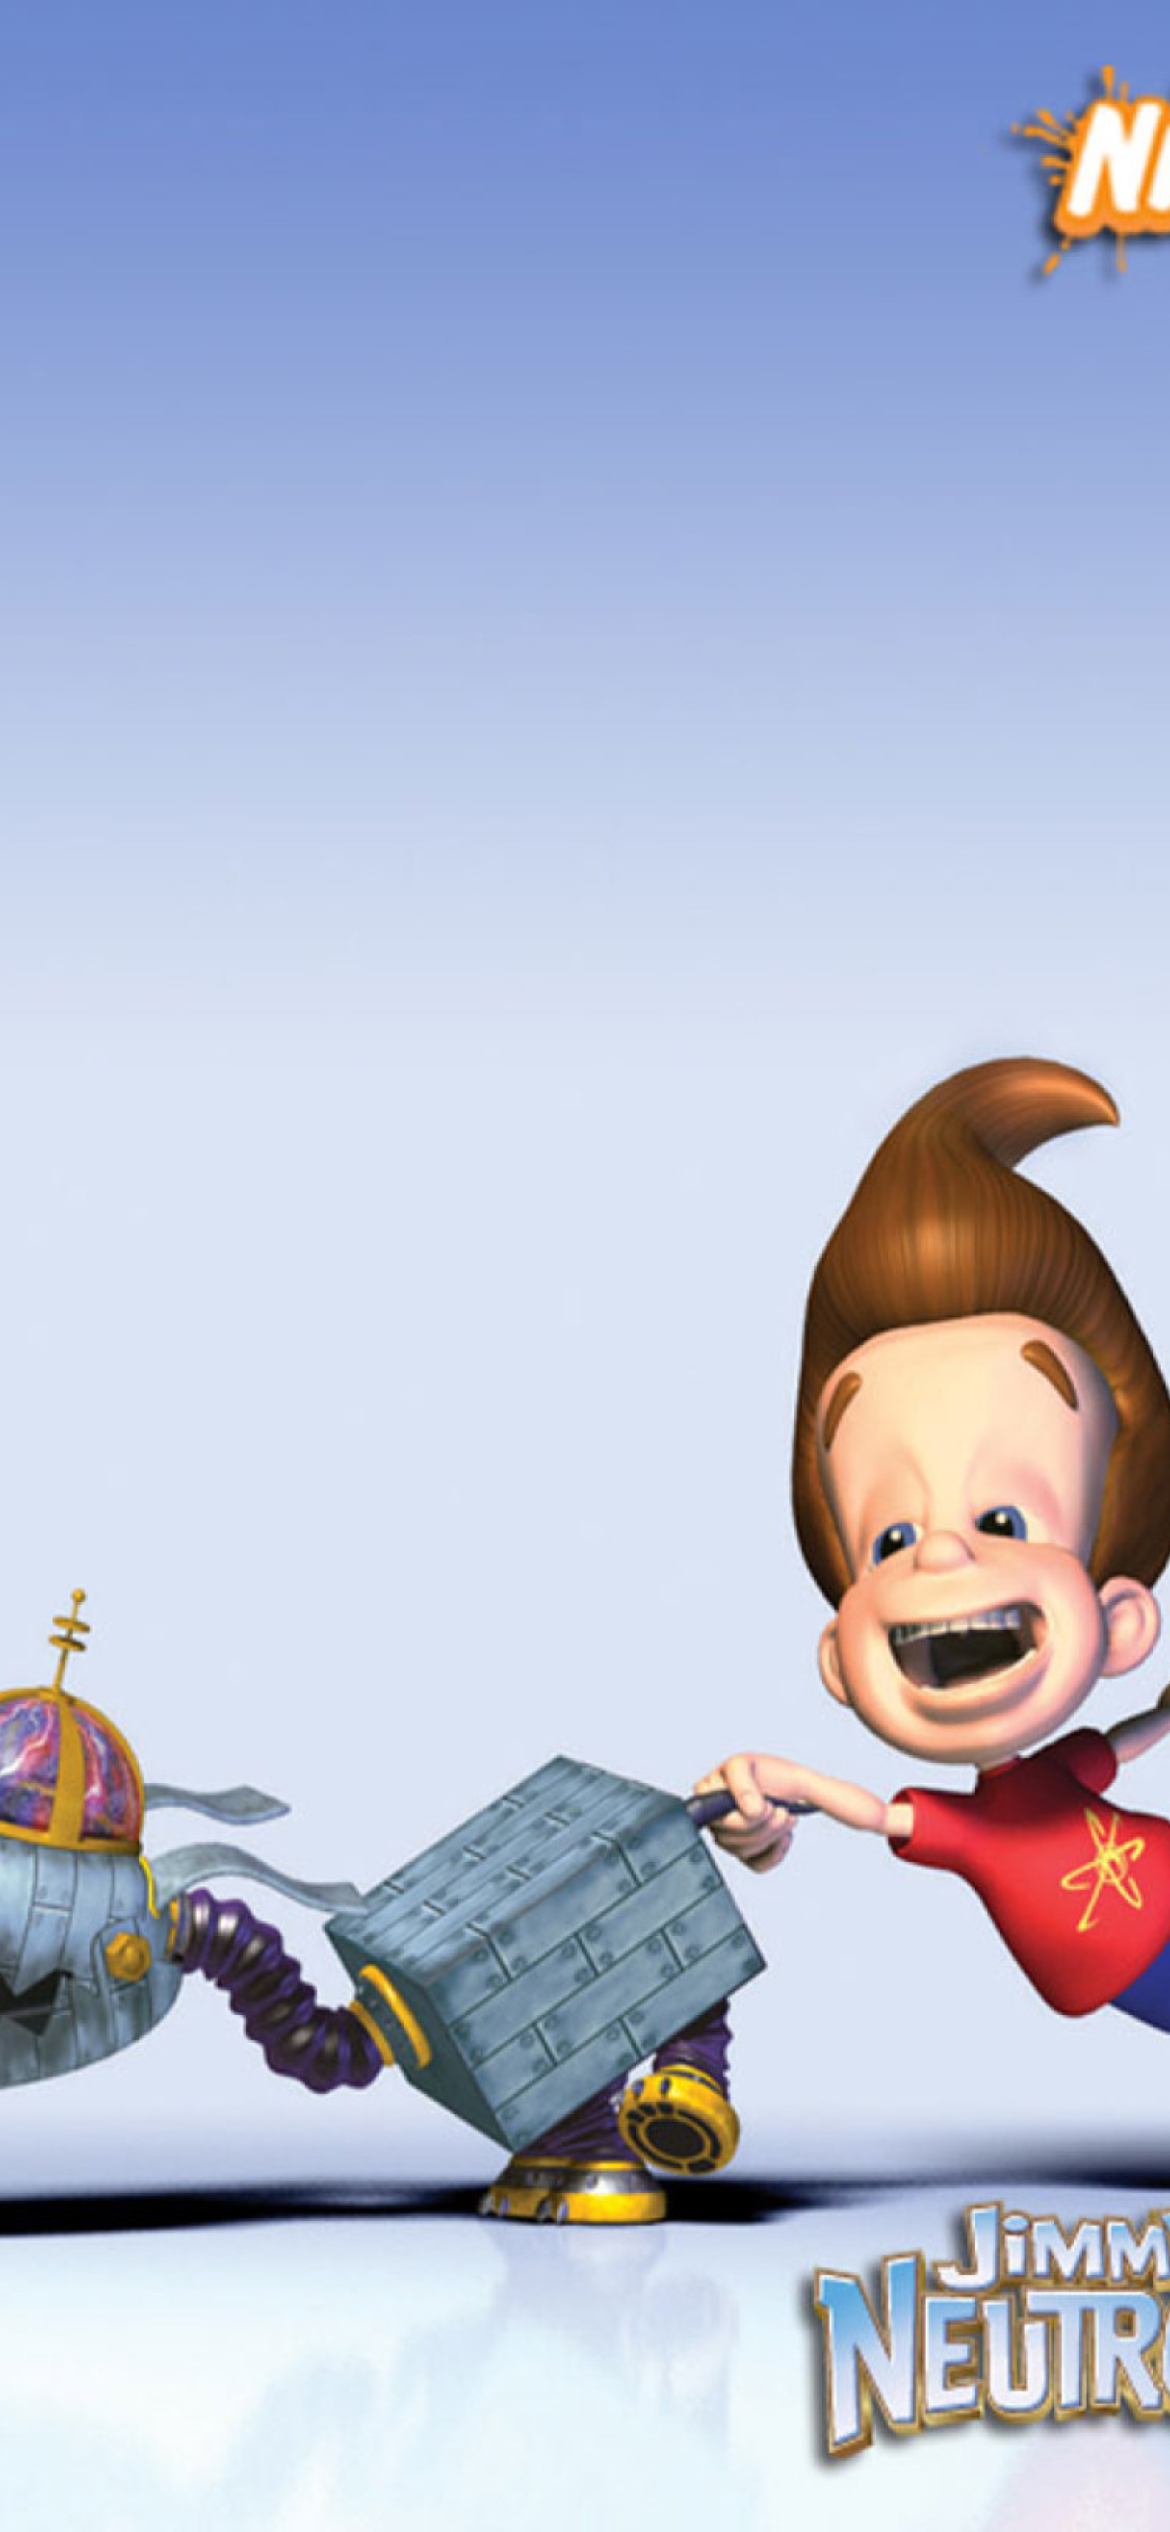 Jimmy Neutron Images Ur Dole Dippers Madam Hd Wallpaper  Jimmy Neutron PNG  Image  Transparent PNG Free Download on SeekPNG